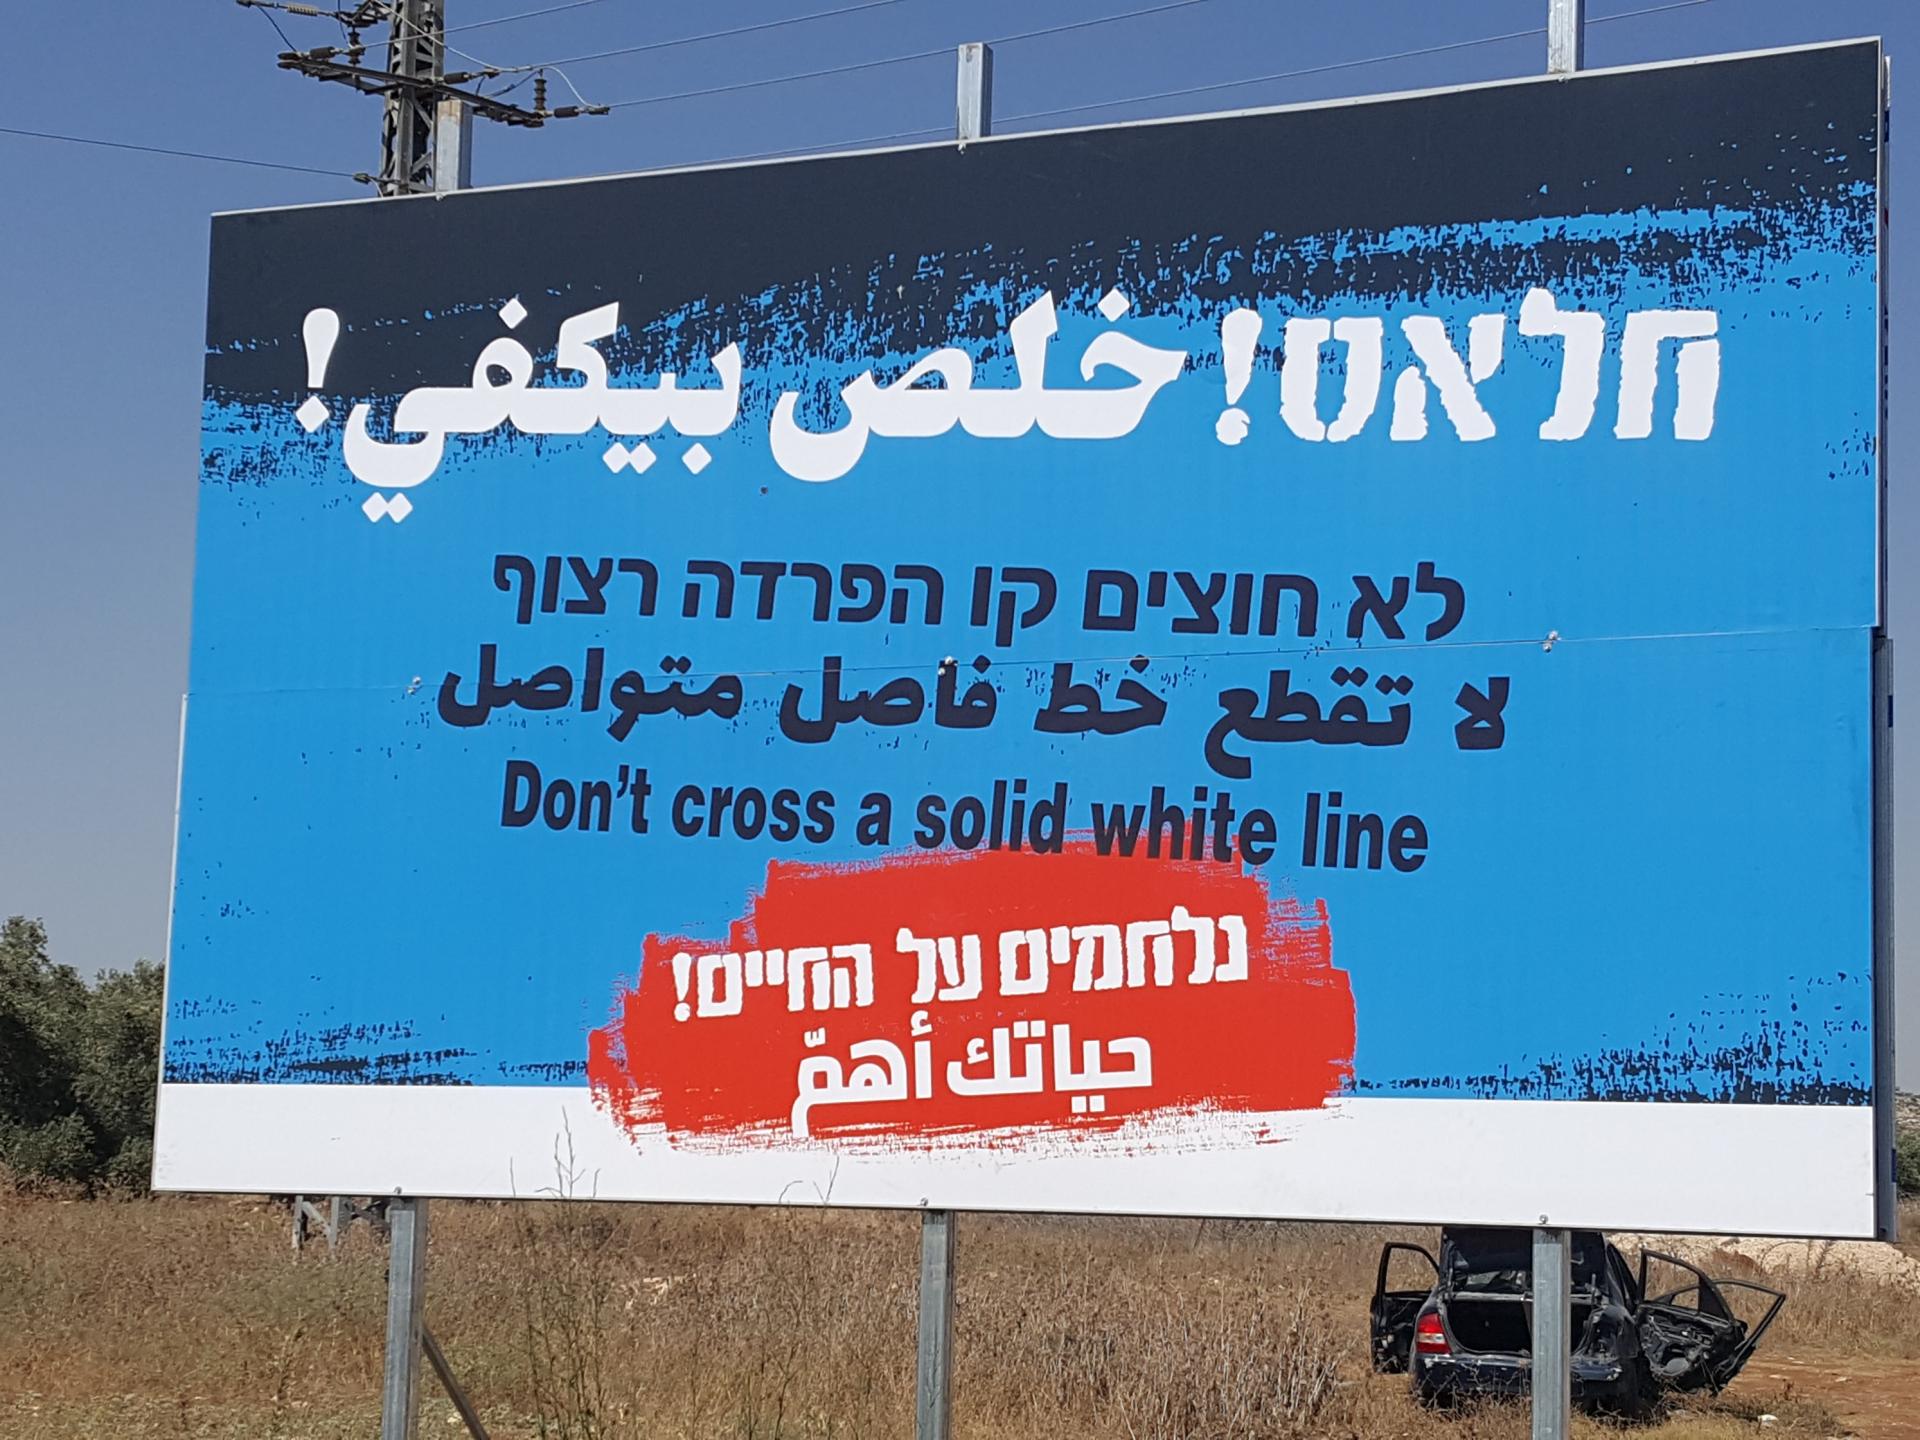 a new sign in Hebrew, Arabic, and English telling drivers not to cross the unbroken line on the road